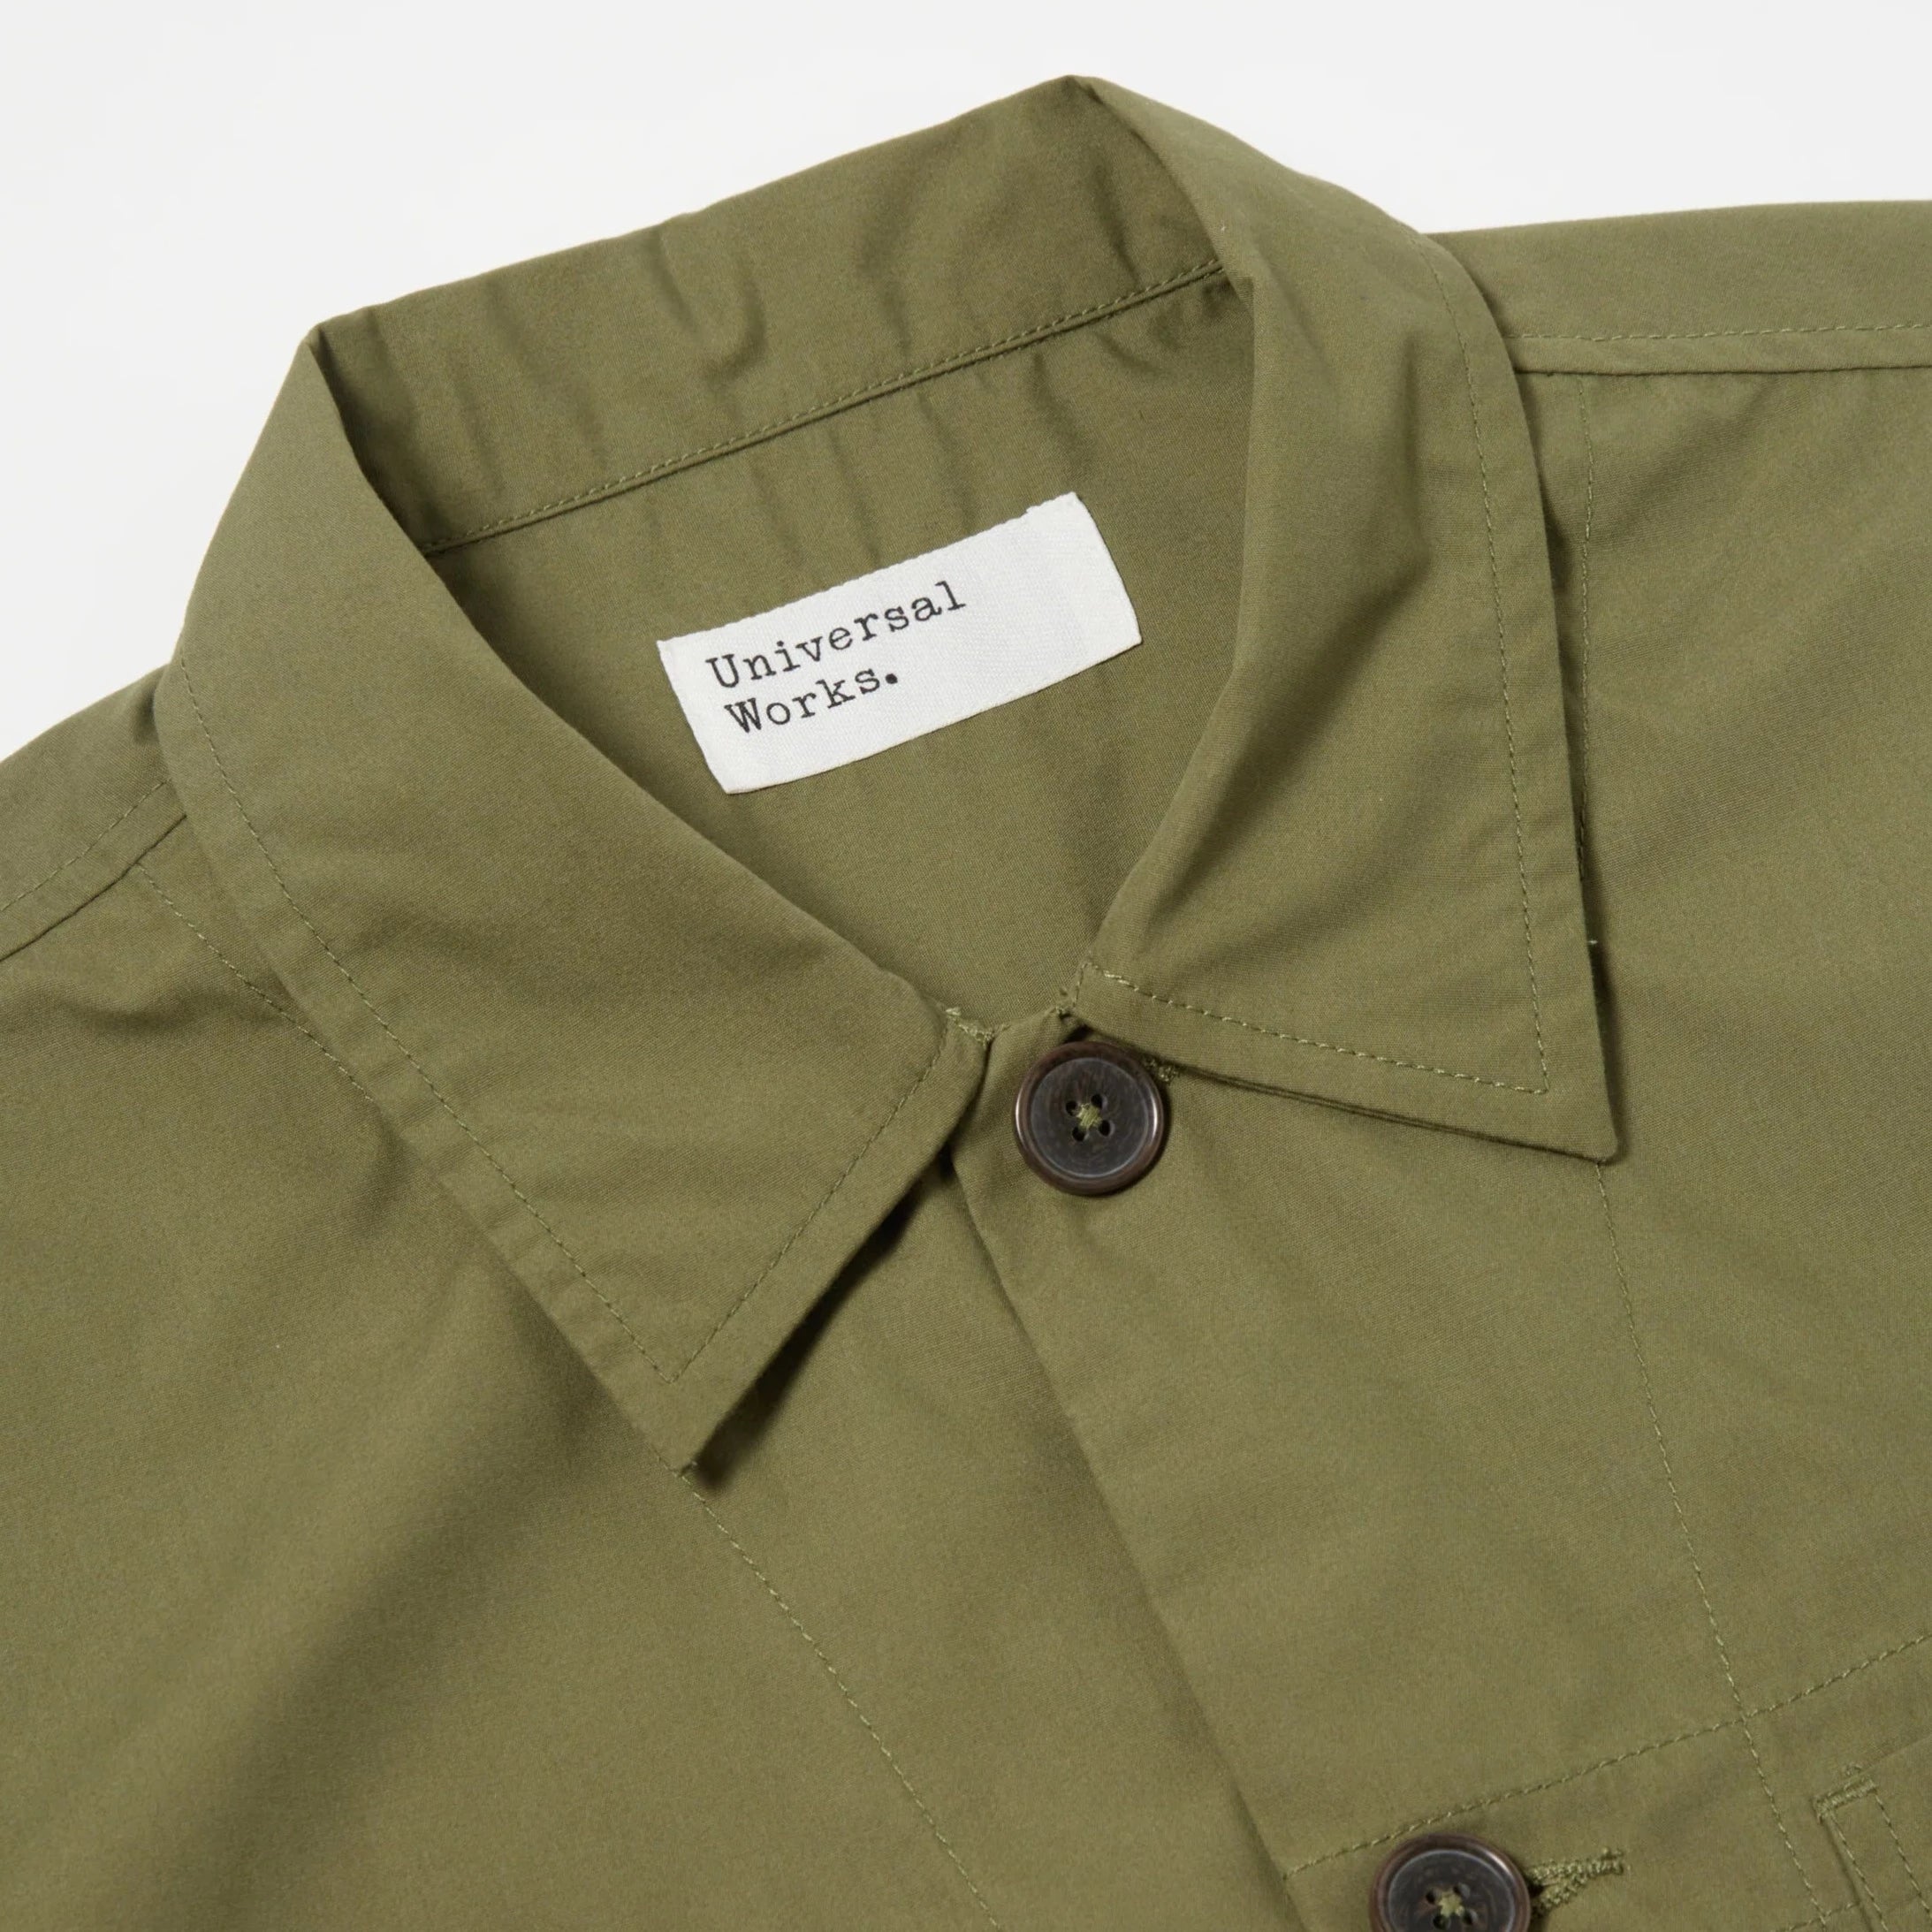 Tech Overshirt - Olive Recycled Poly Tech